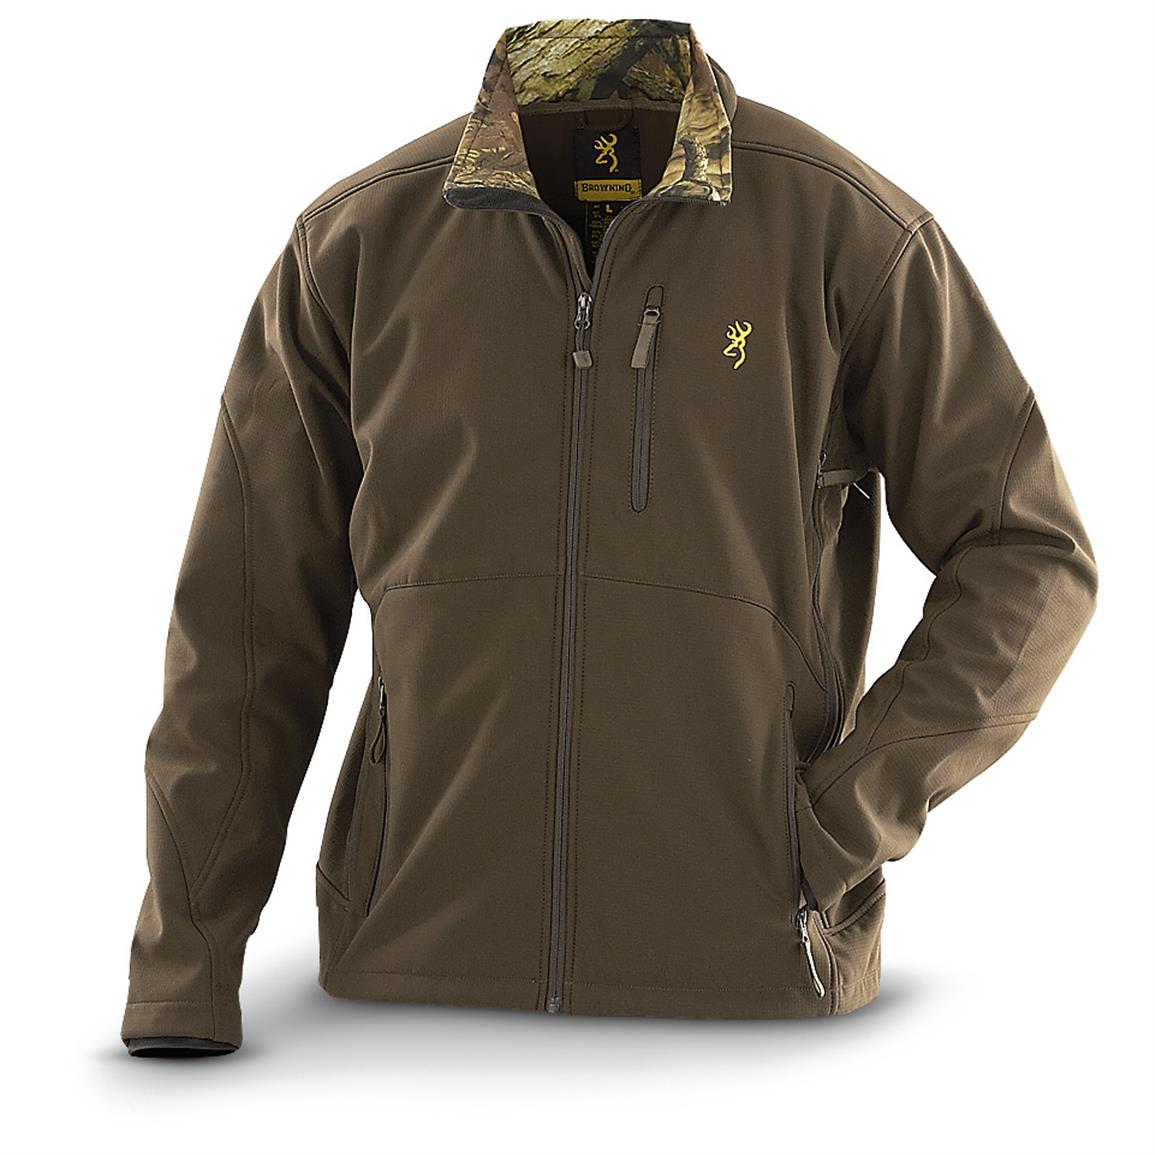 Browning Colt Jacket - 608380, Insulated Jackets & Coats at Sportsman's ...